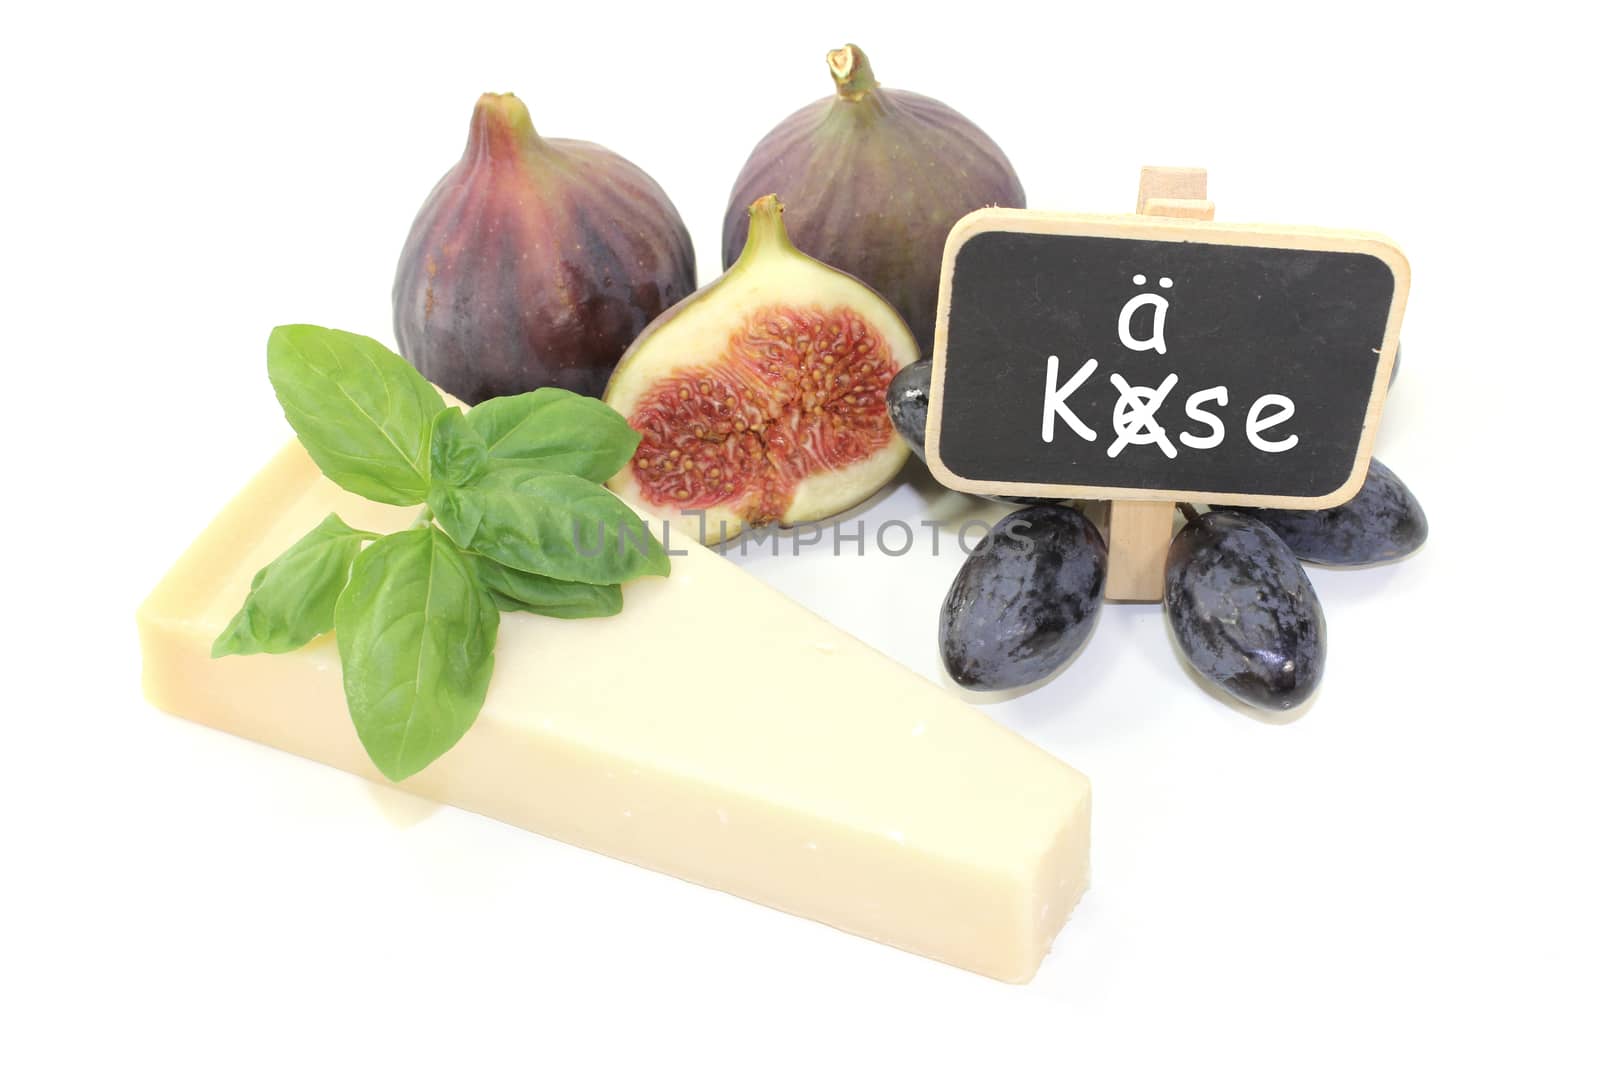 Parmesan cheese with figs, grapes, basil and blackboard